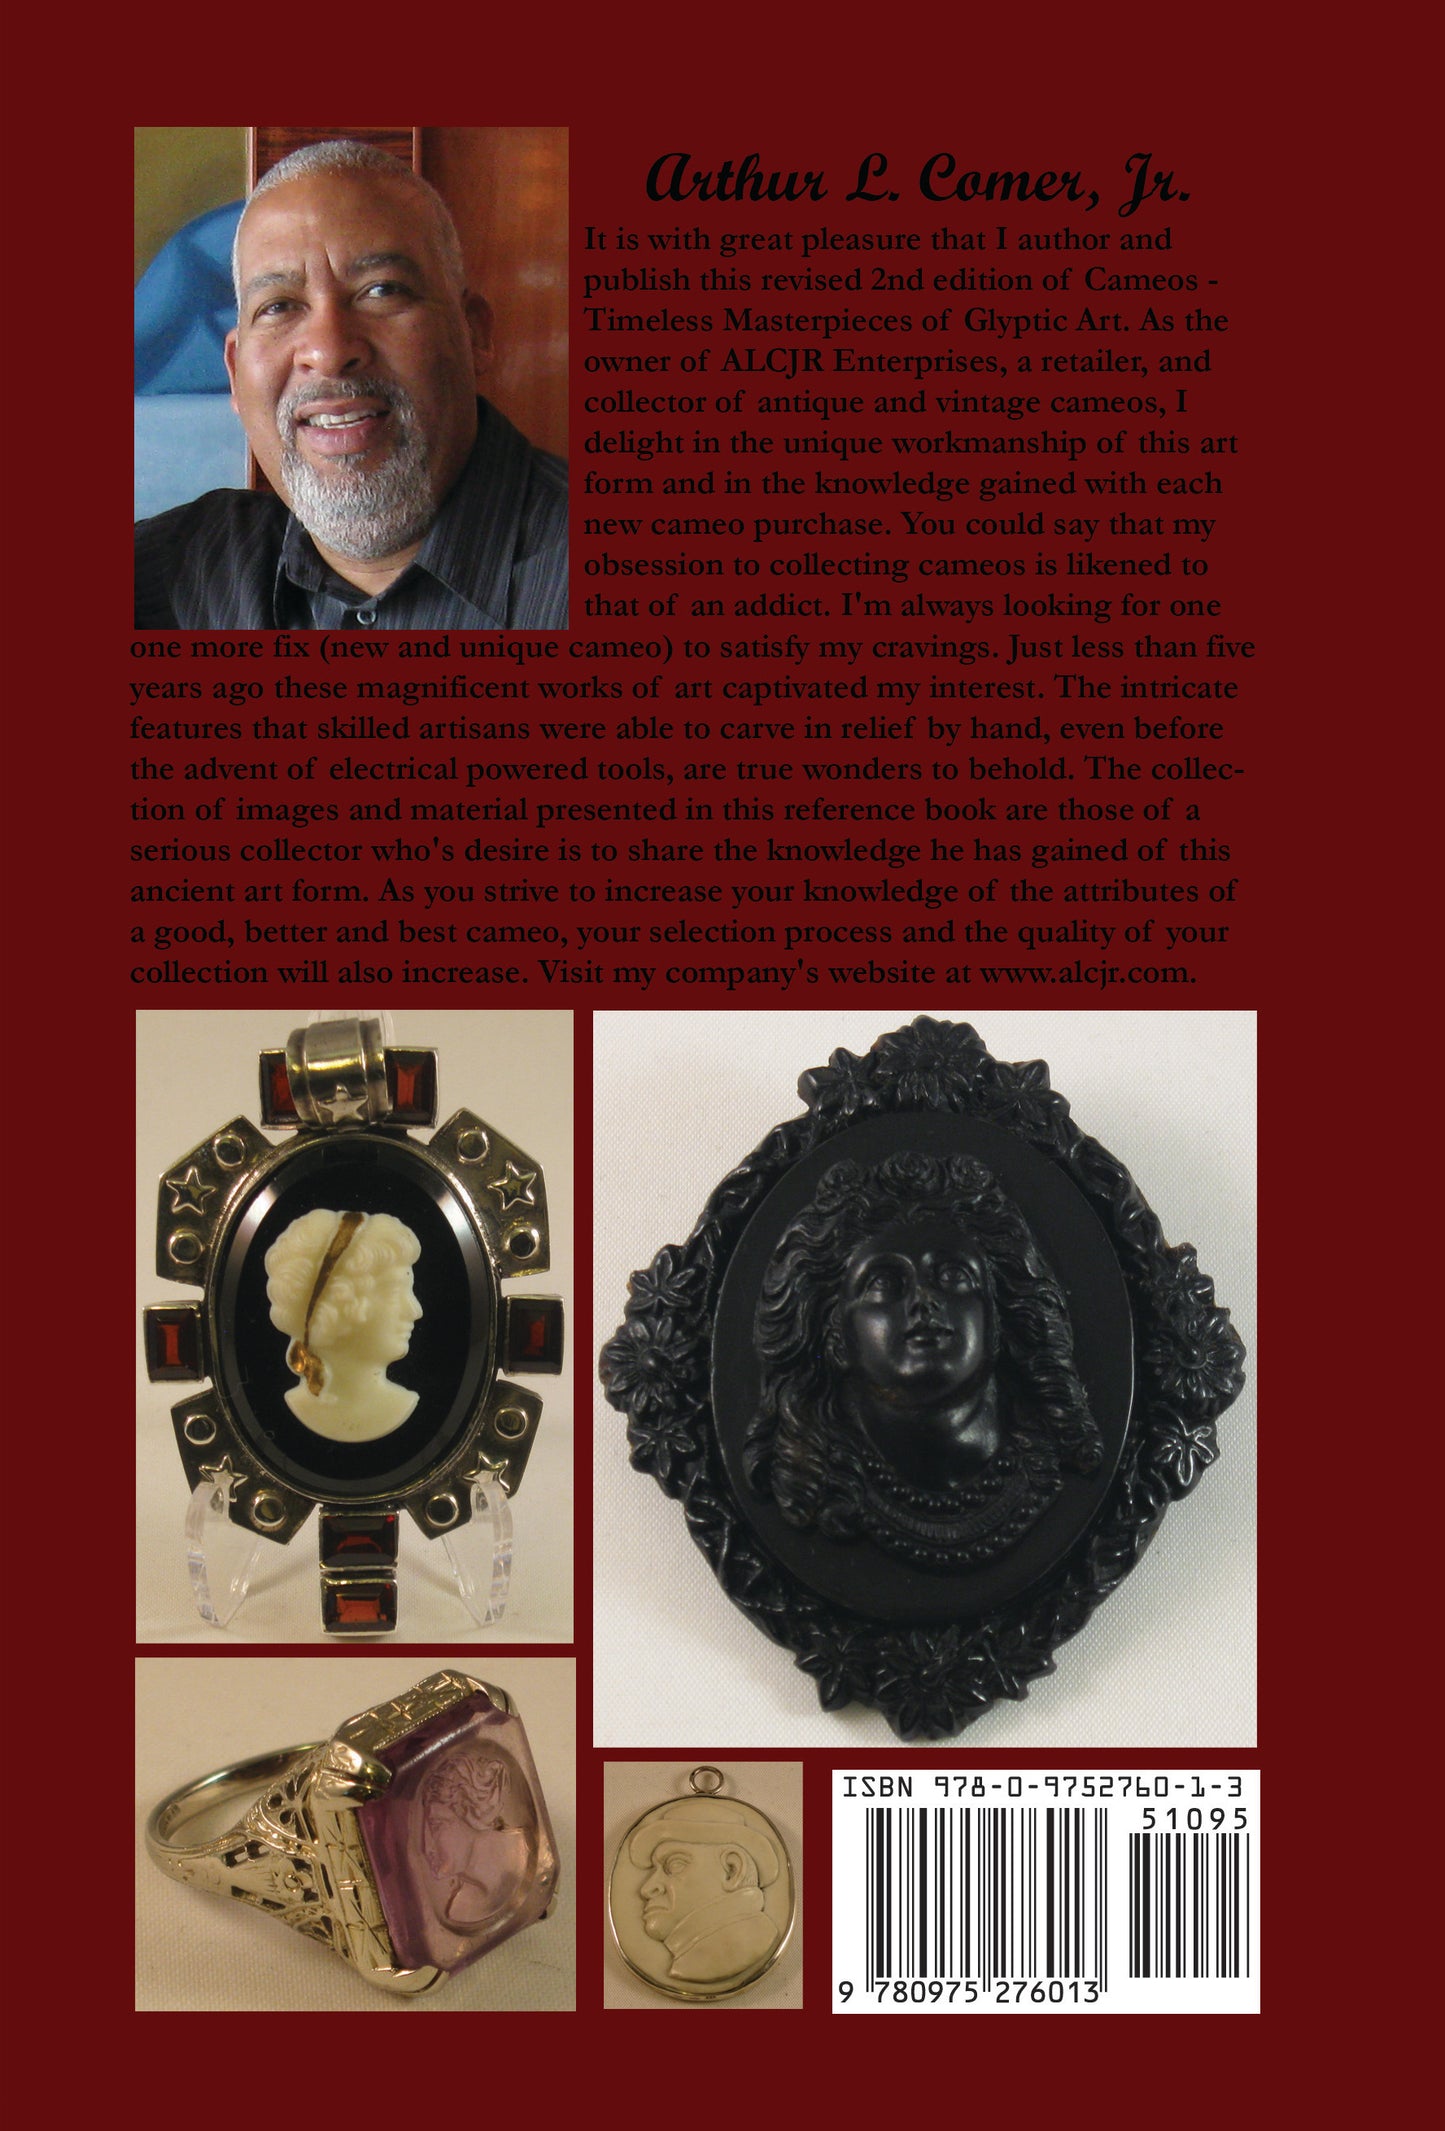 Cameos, Timeless Masterpieces of Glyptic Art, ISBN 978-0-9752760-1-3